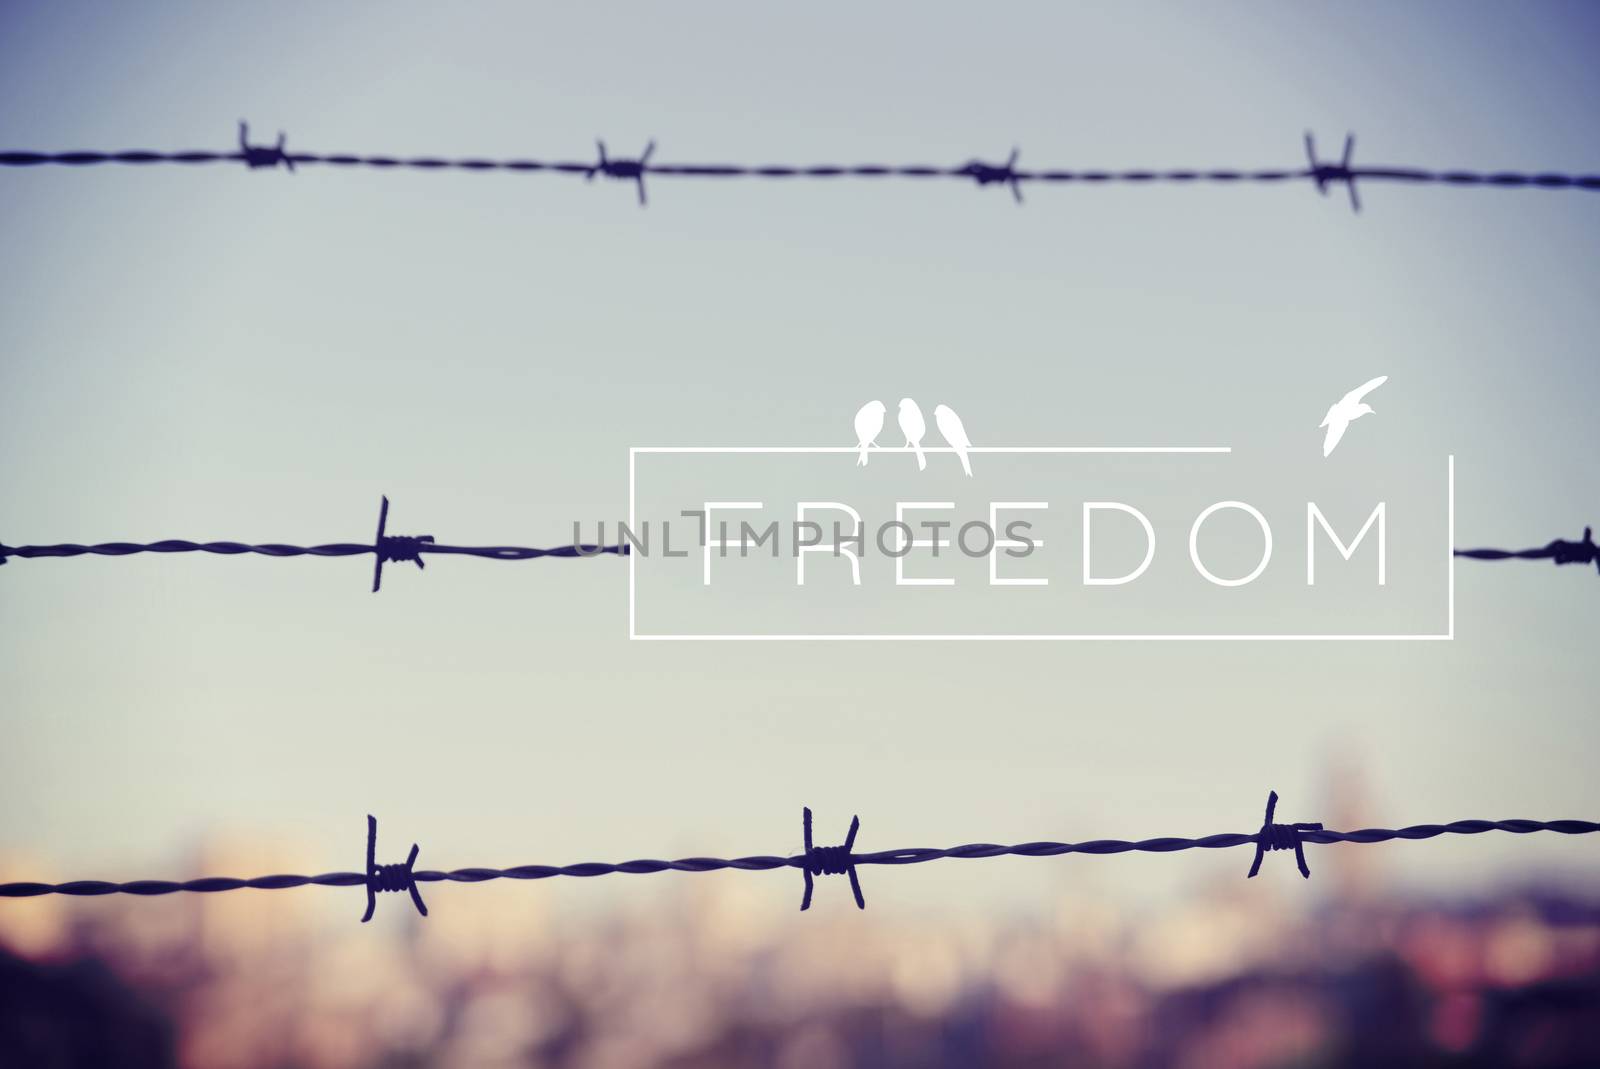 Freedom quote concept barbed wire background by cienpies